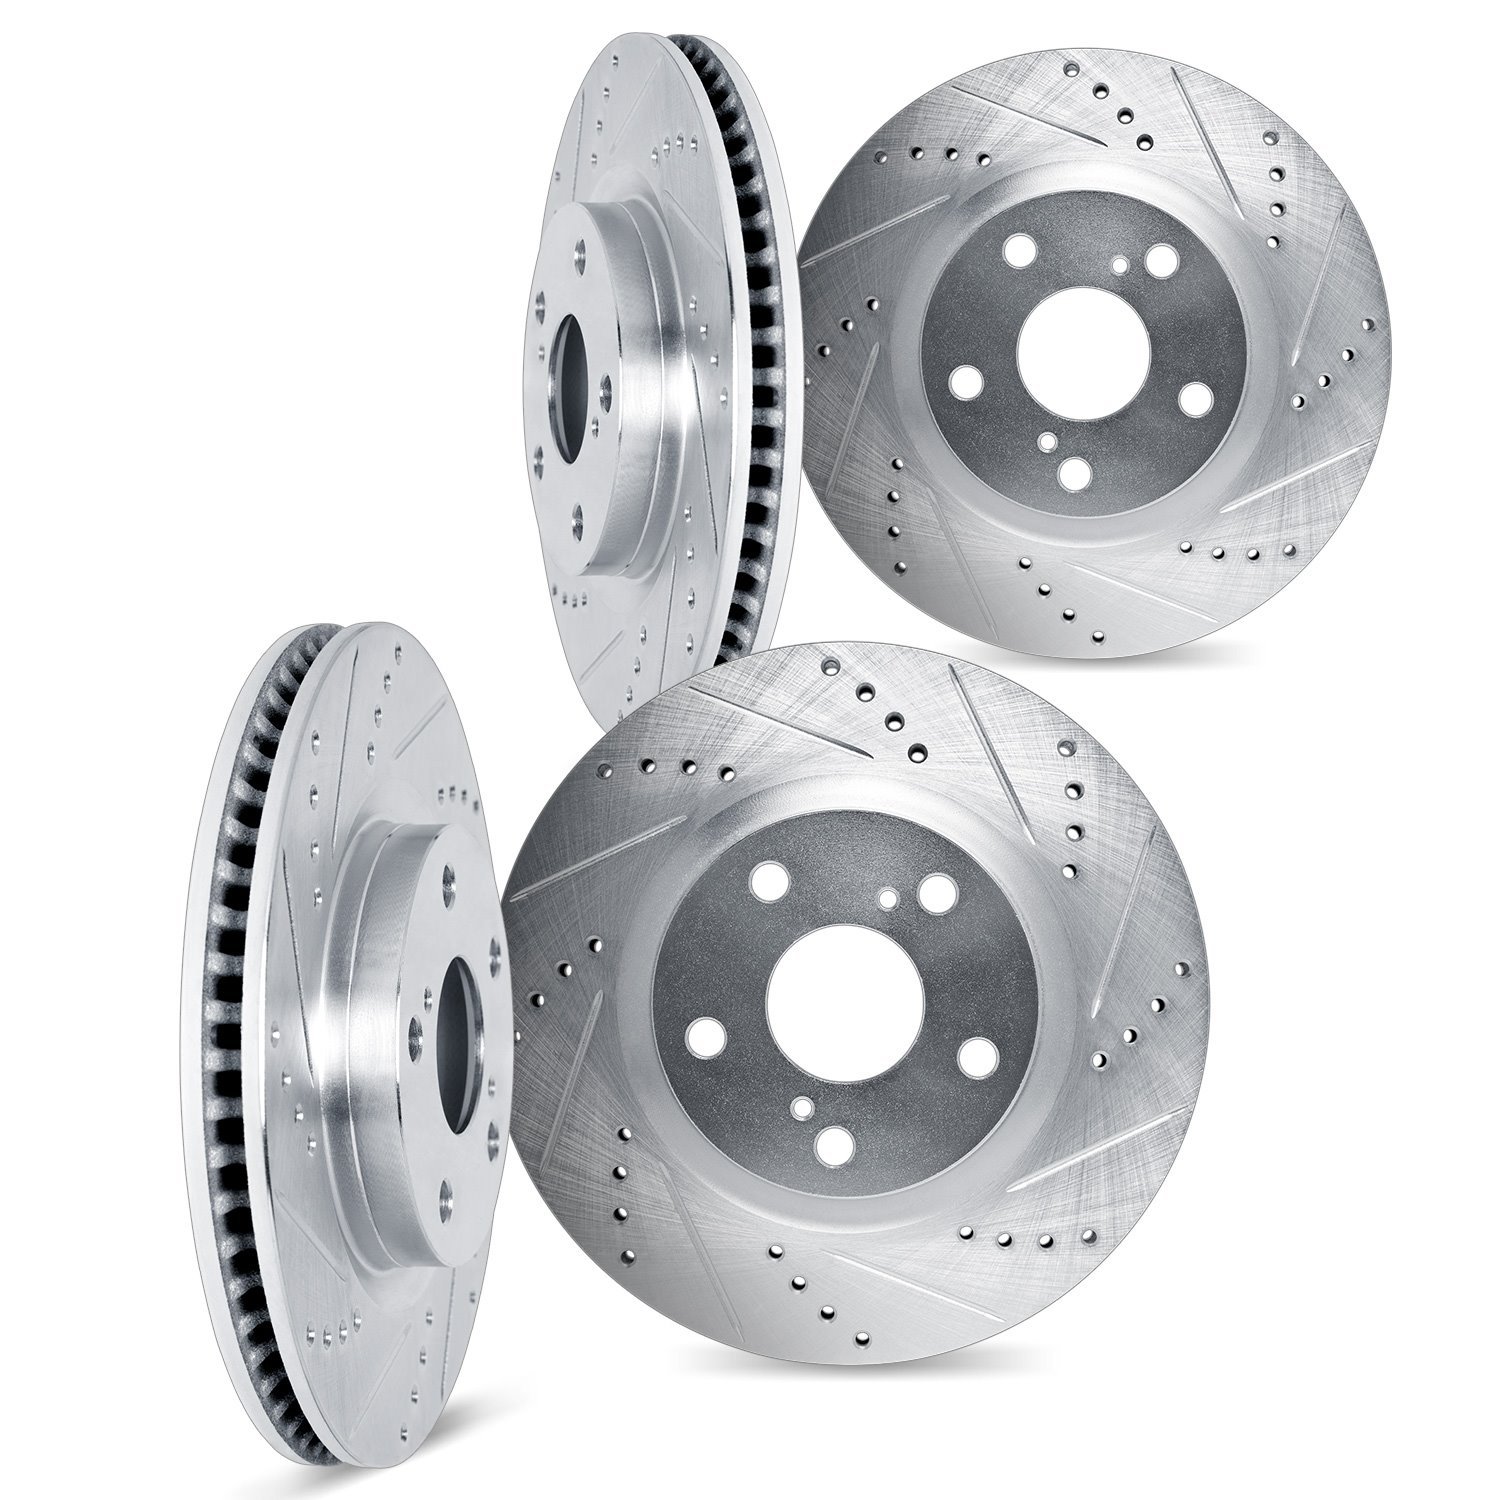 7004-76178 Drilled/Slotted Brake Rotors [Silver], Fits Select Lexus/Toyota/Scion, Position: Front and Rear